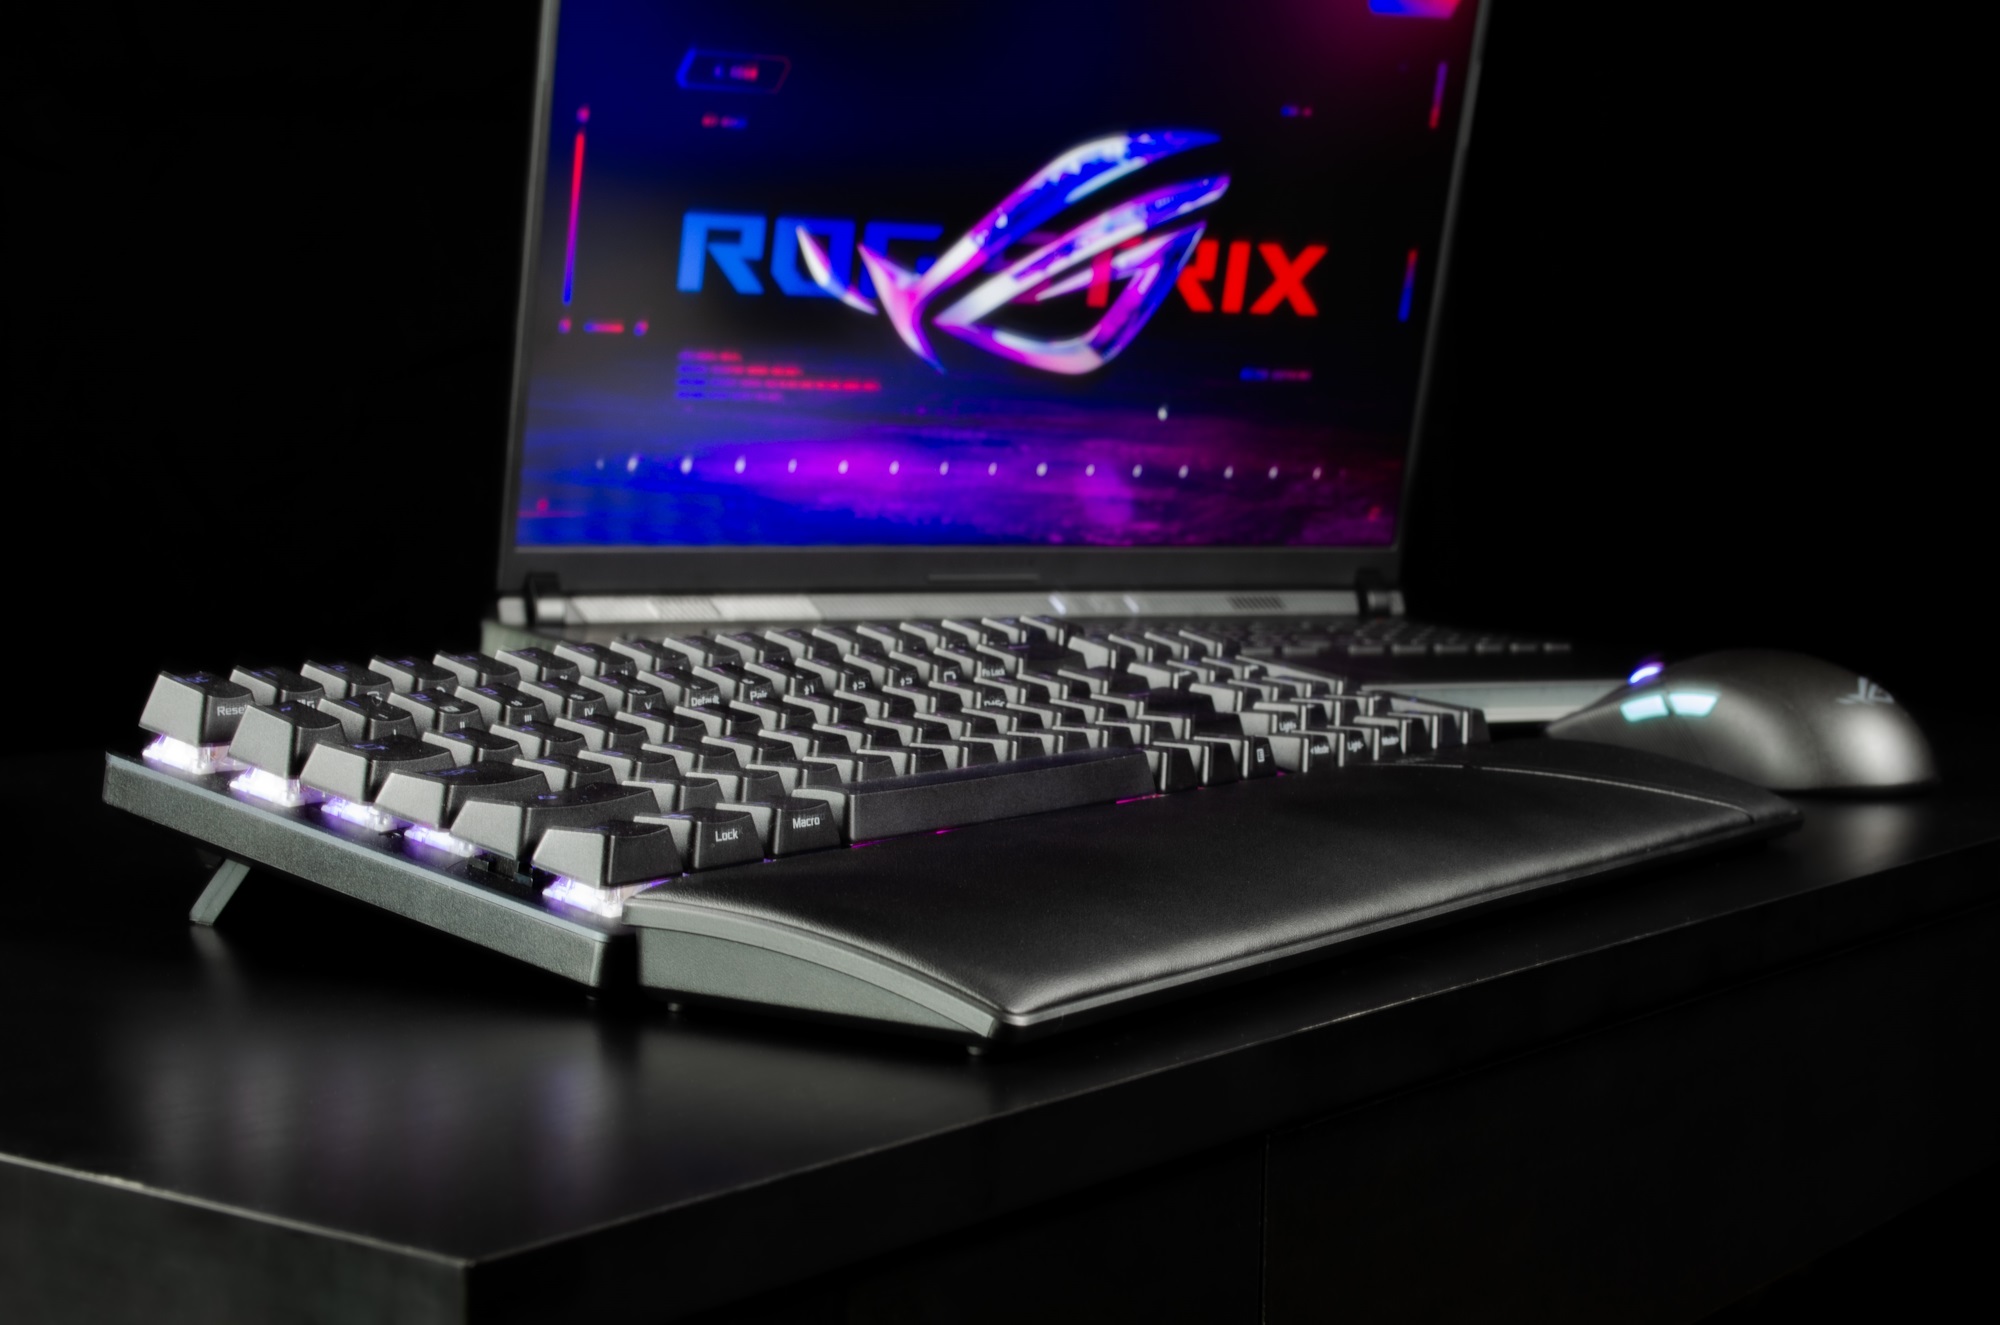 A side view of the ROG Strix Scope II 96 Wireless gaming keyboard in front of a ROG mouse and laptop